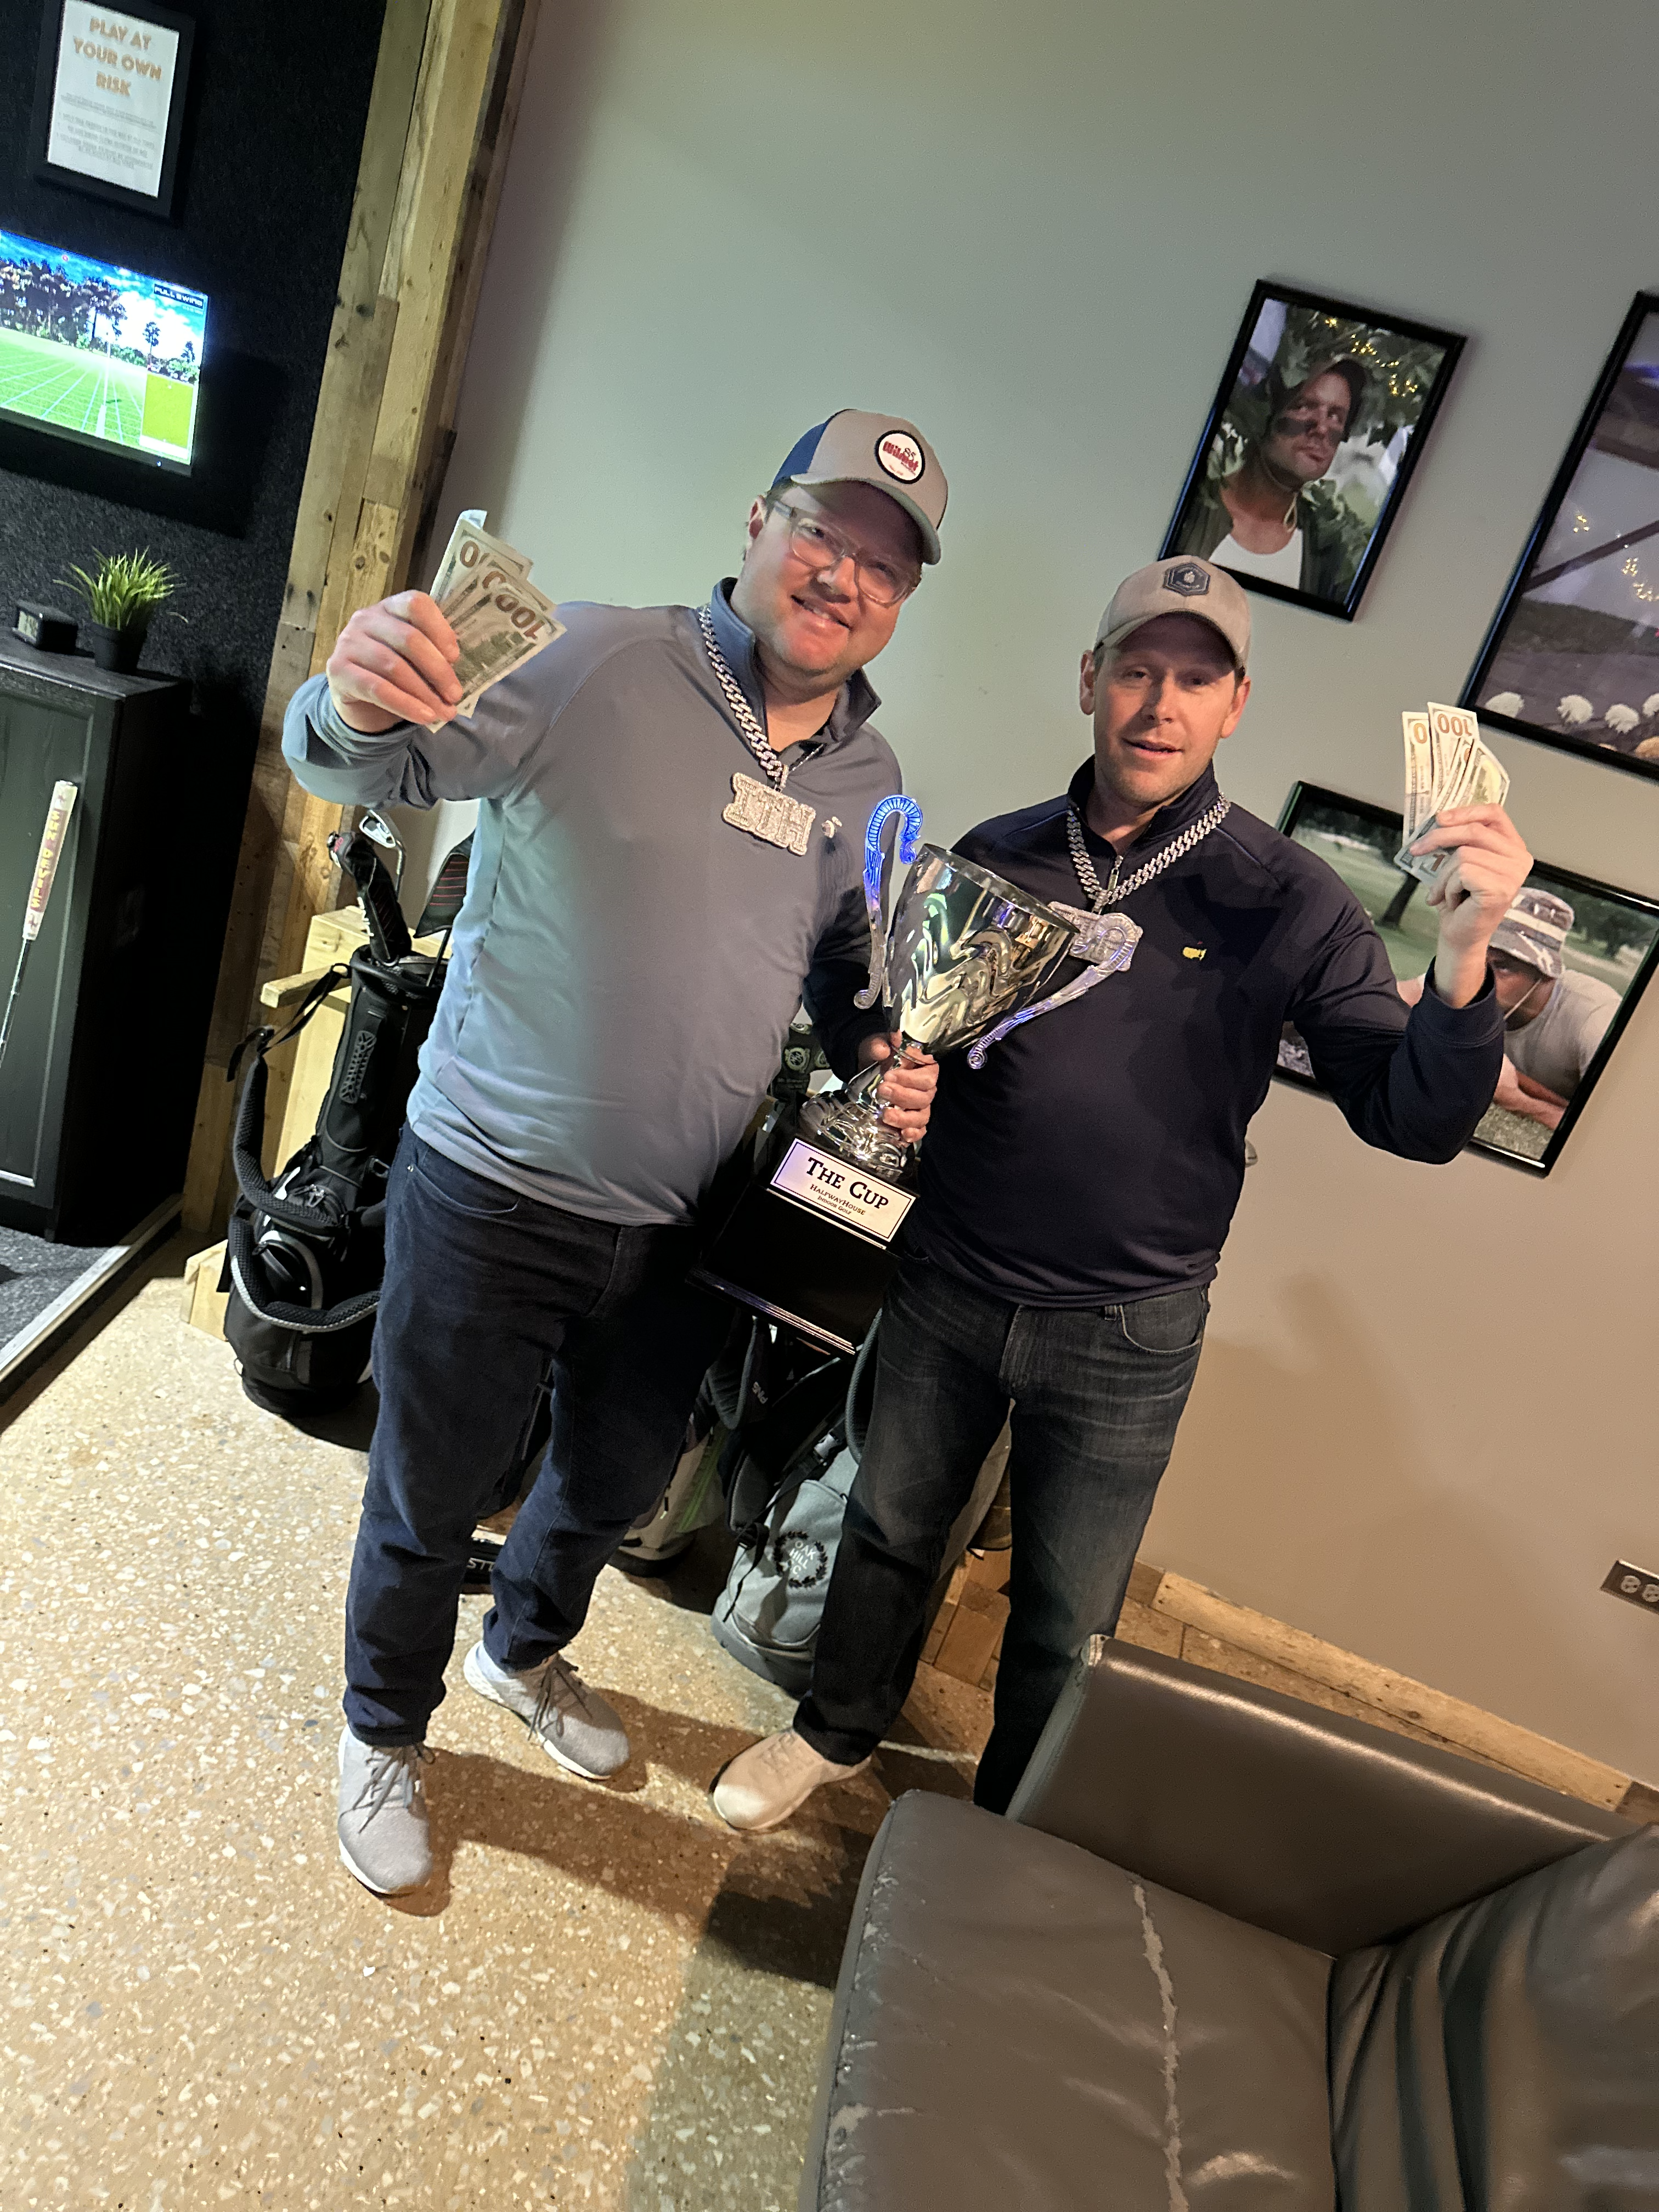 2023 winter league champions halfway house indoor golf leagues